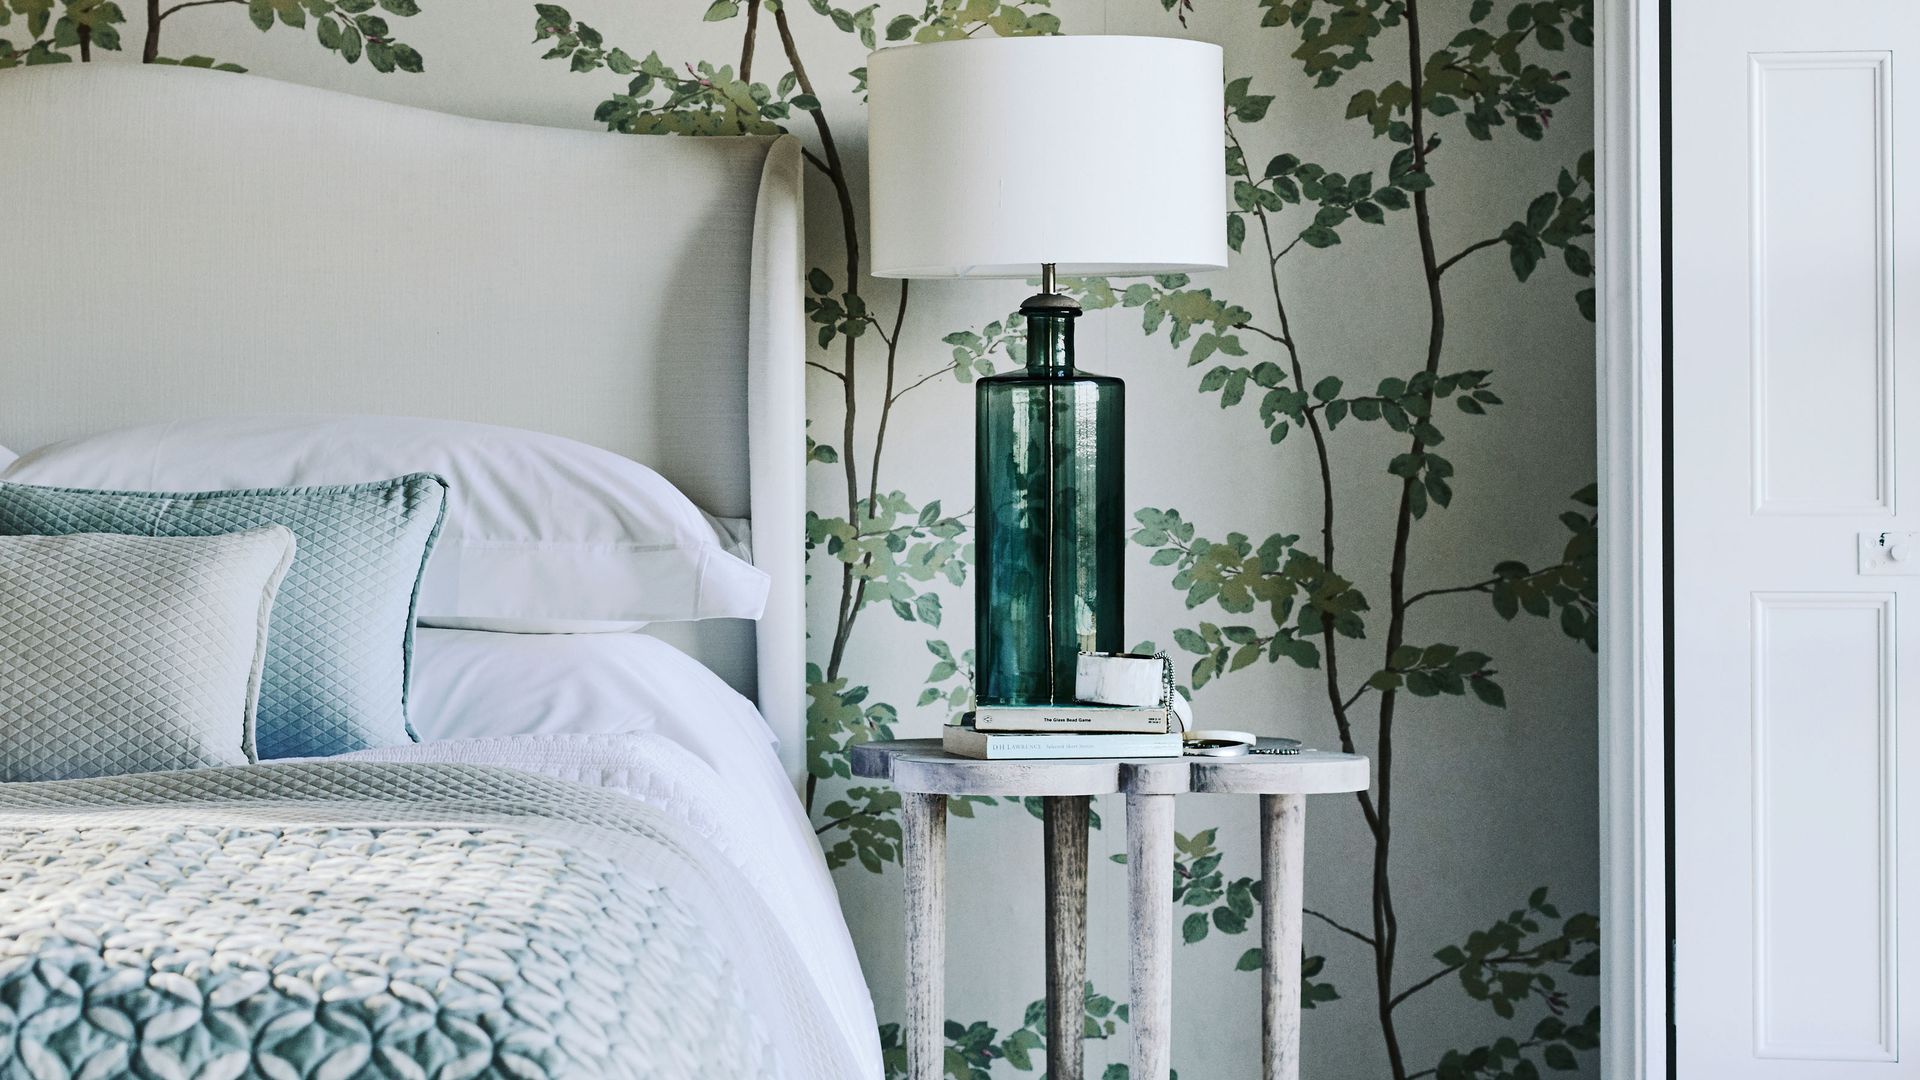 HGTV's Jenny Marrs warns against this bedroom layout mistake | Homes ...